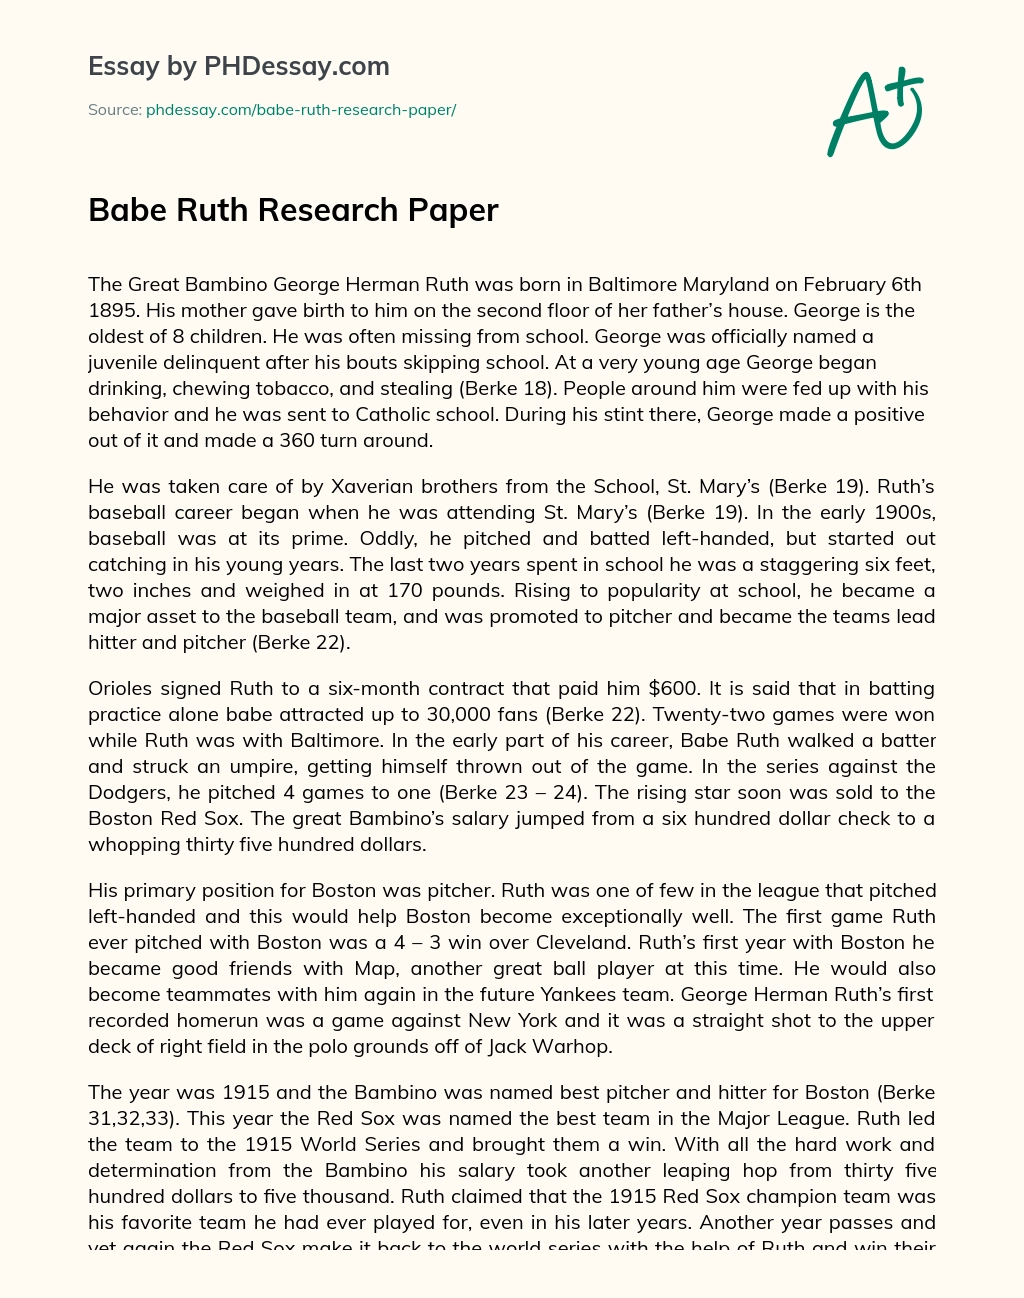 Babe Ruth Research Paper essay